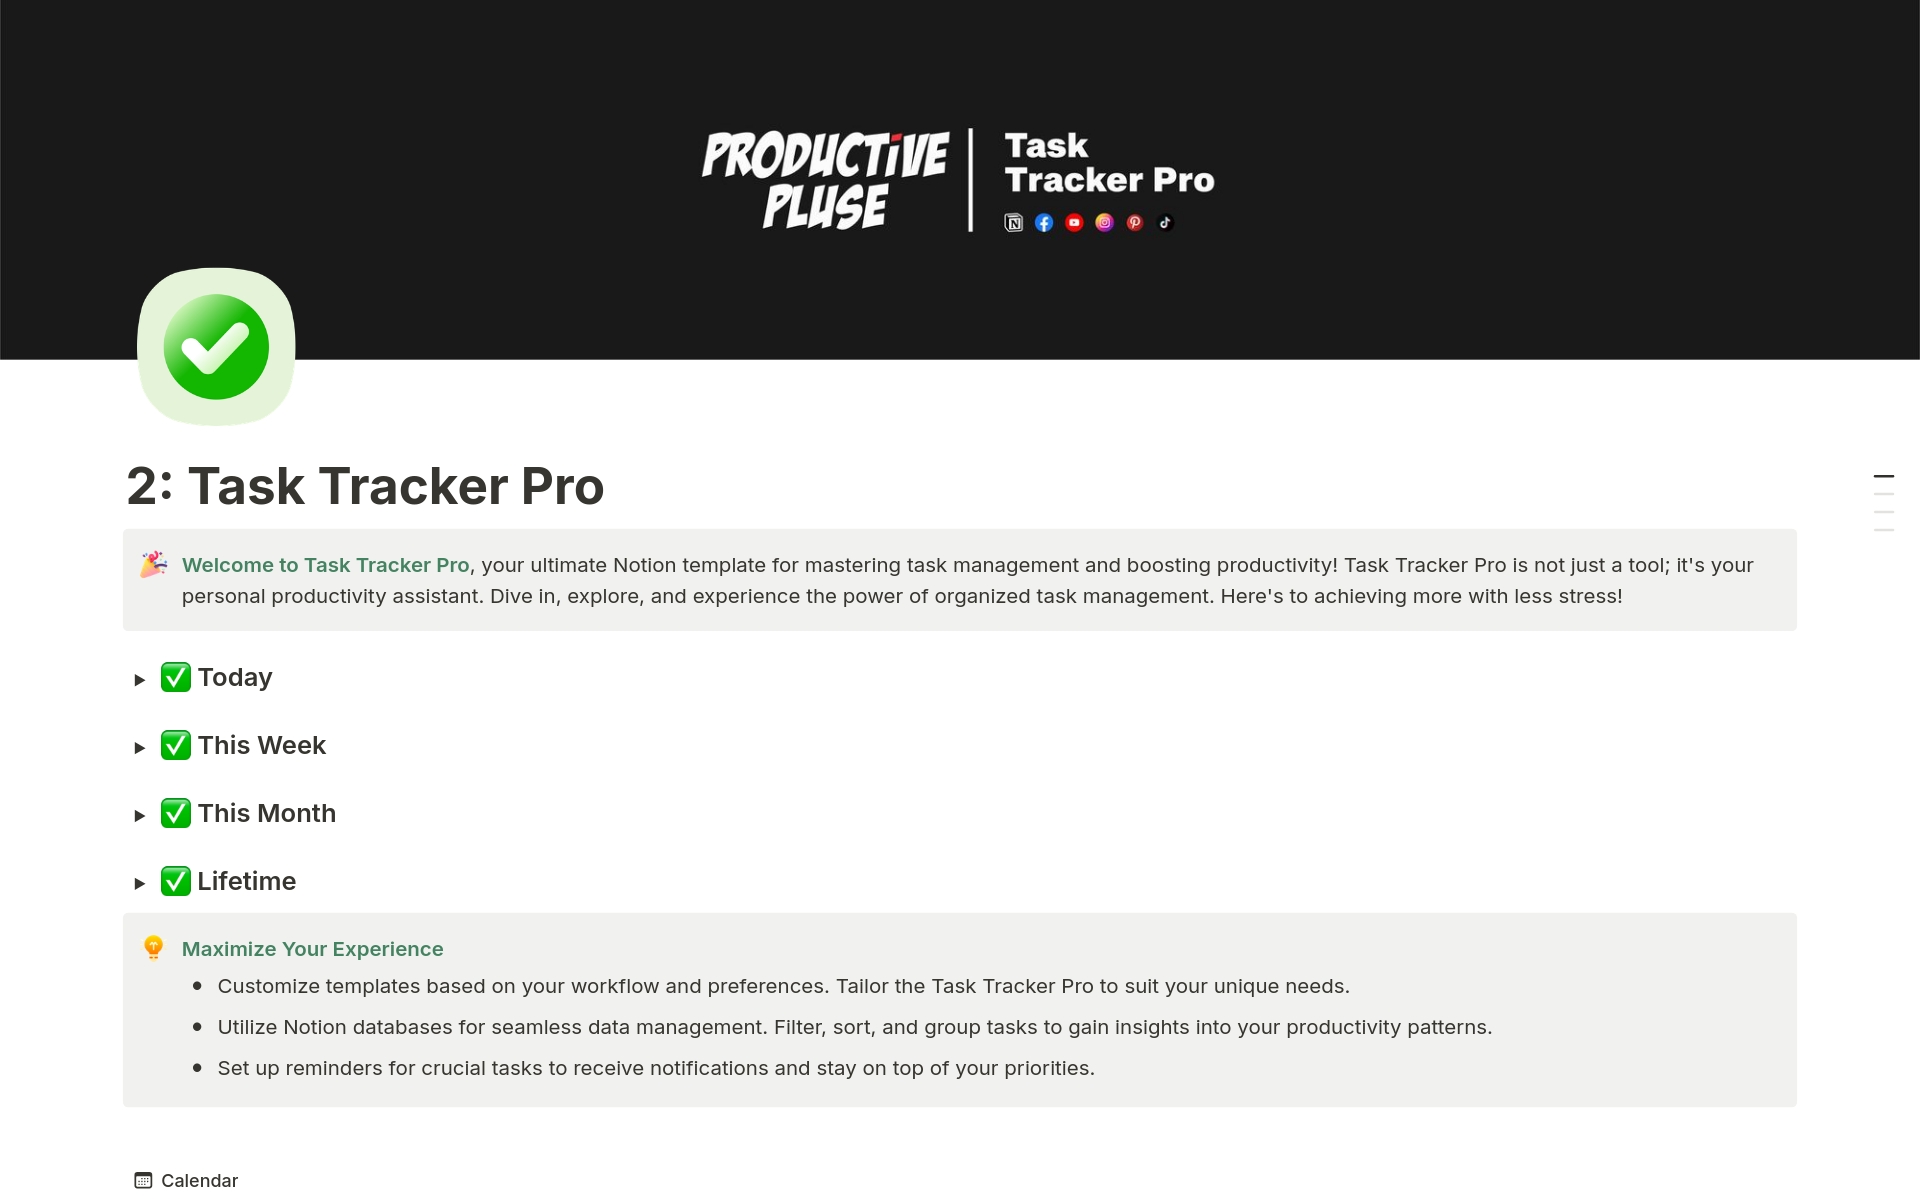 Task Tracker Pro is an ultimate Notion template for mastering task management and boosting productivity!